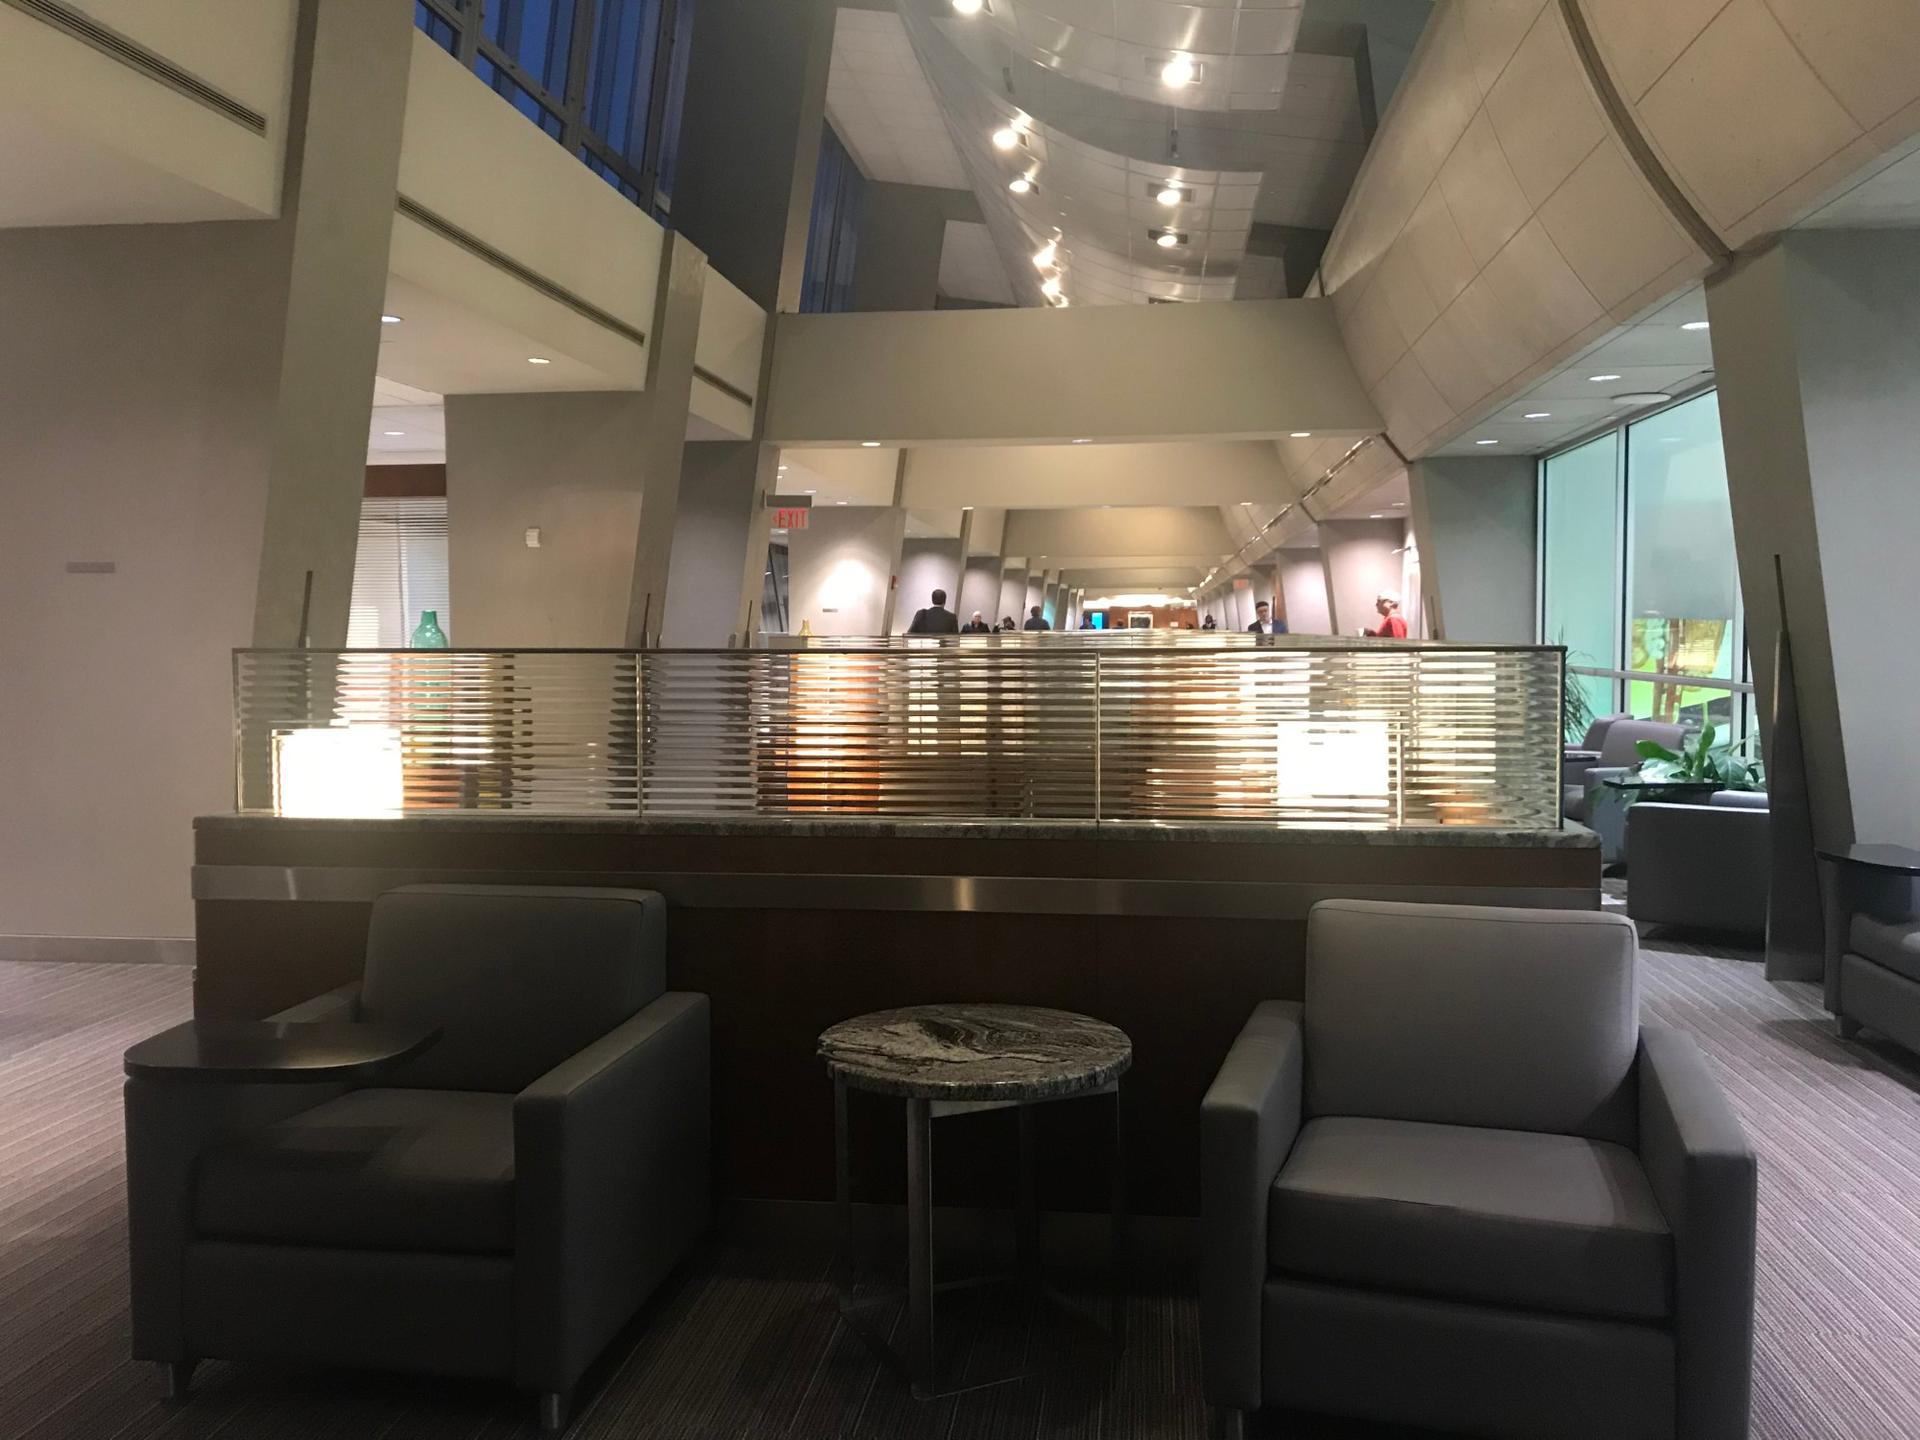 American Airlines Admirals Club image 40 of 48